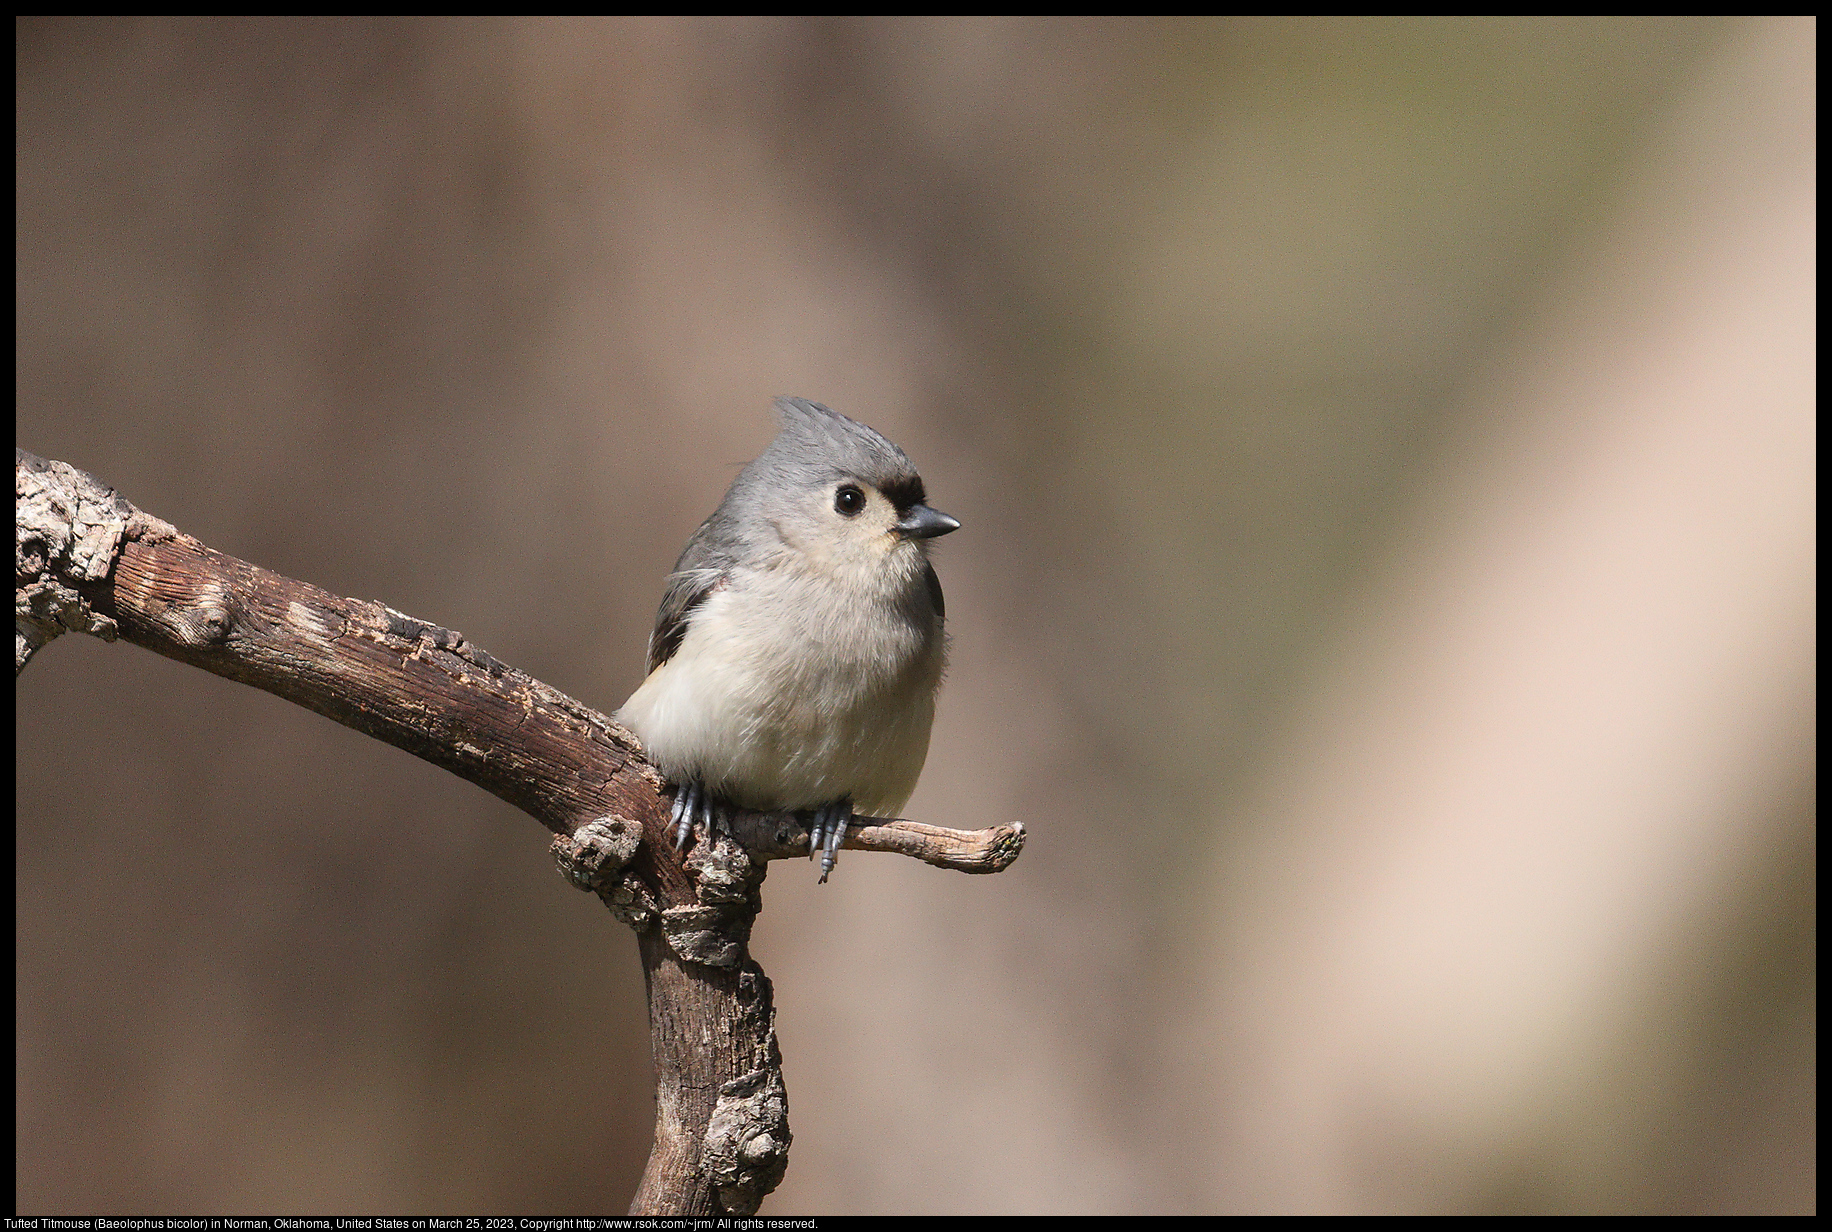 Tufted Titmouse (Baeolophus bicolor) in Norman, Oklahoma, United States on March 25, 2023